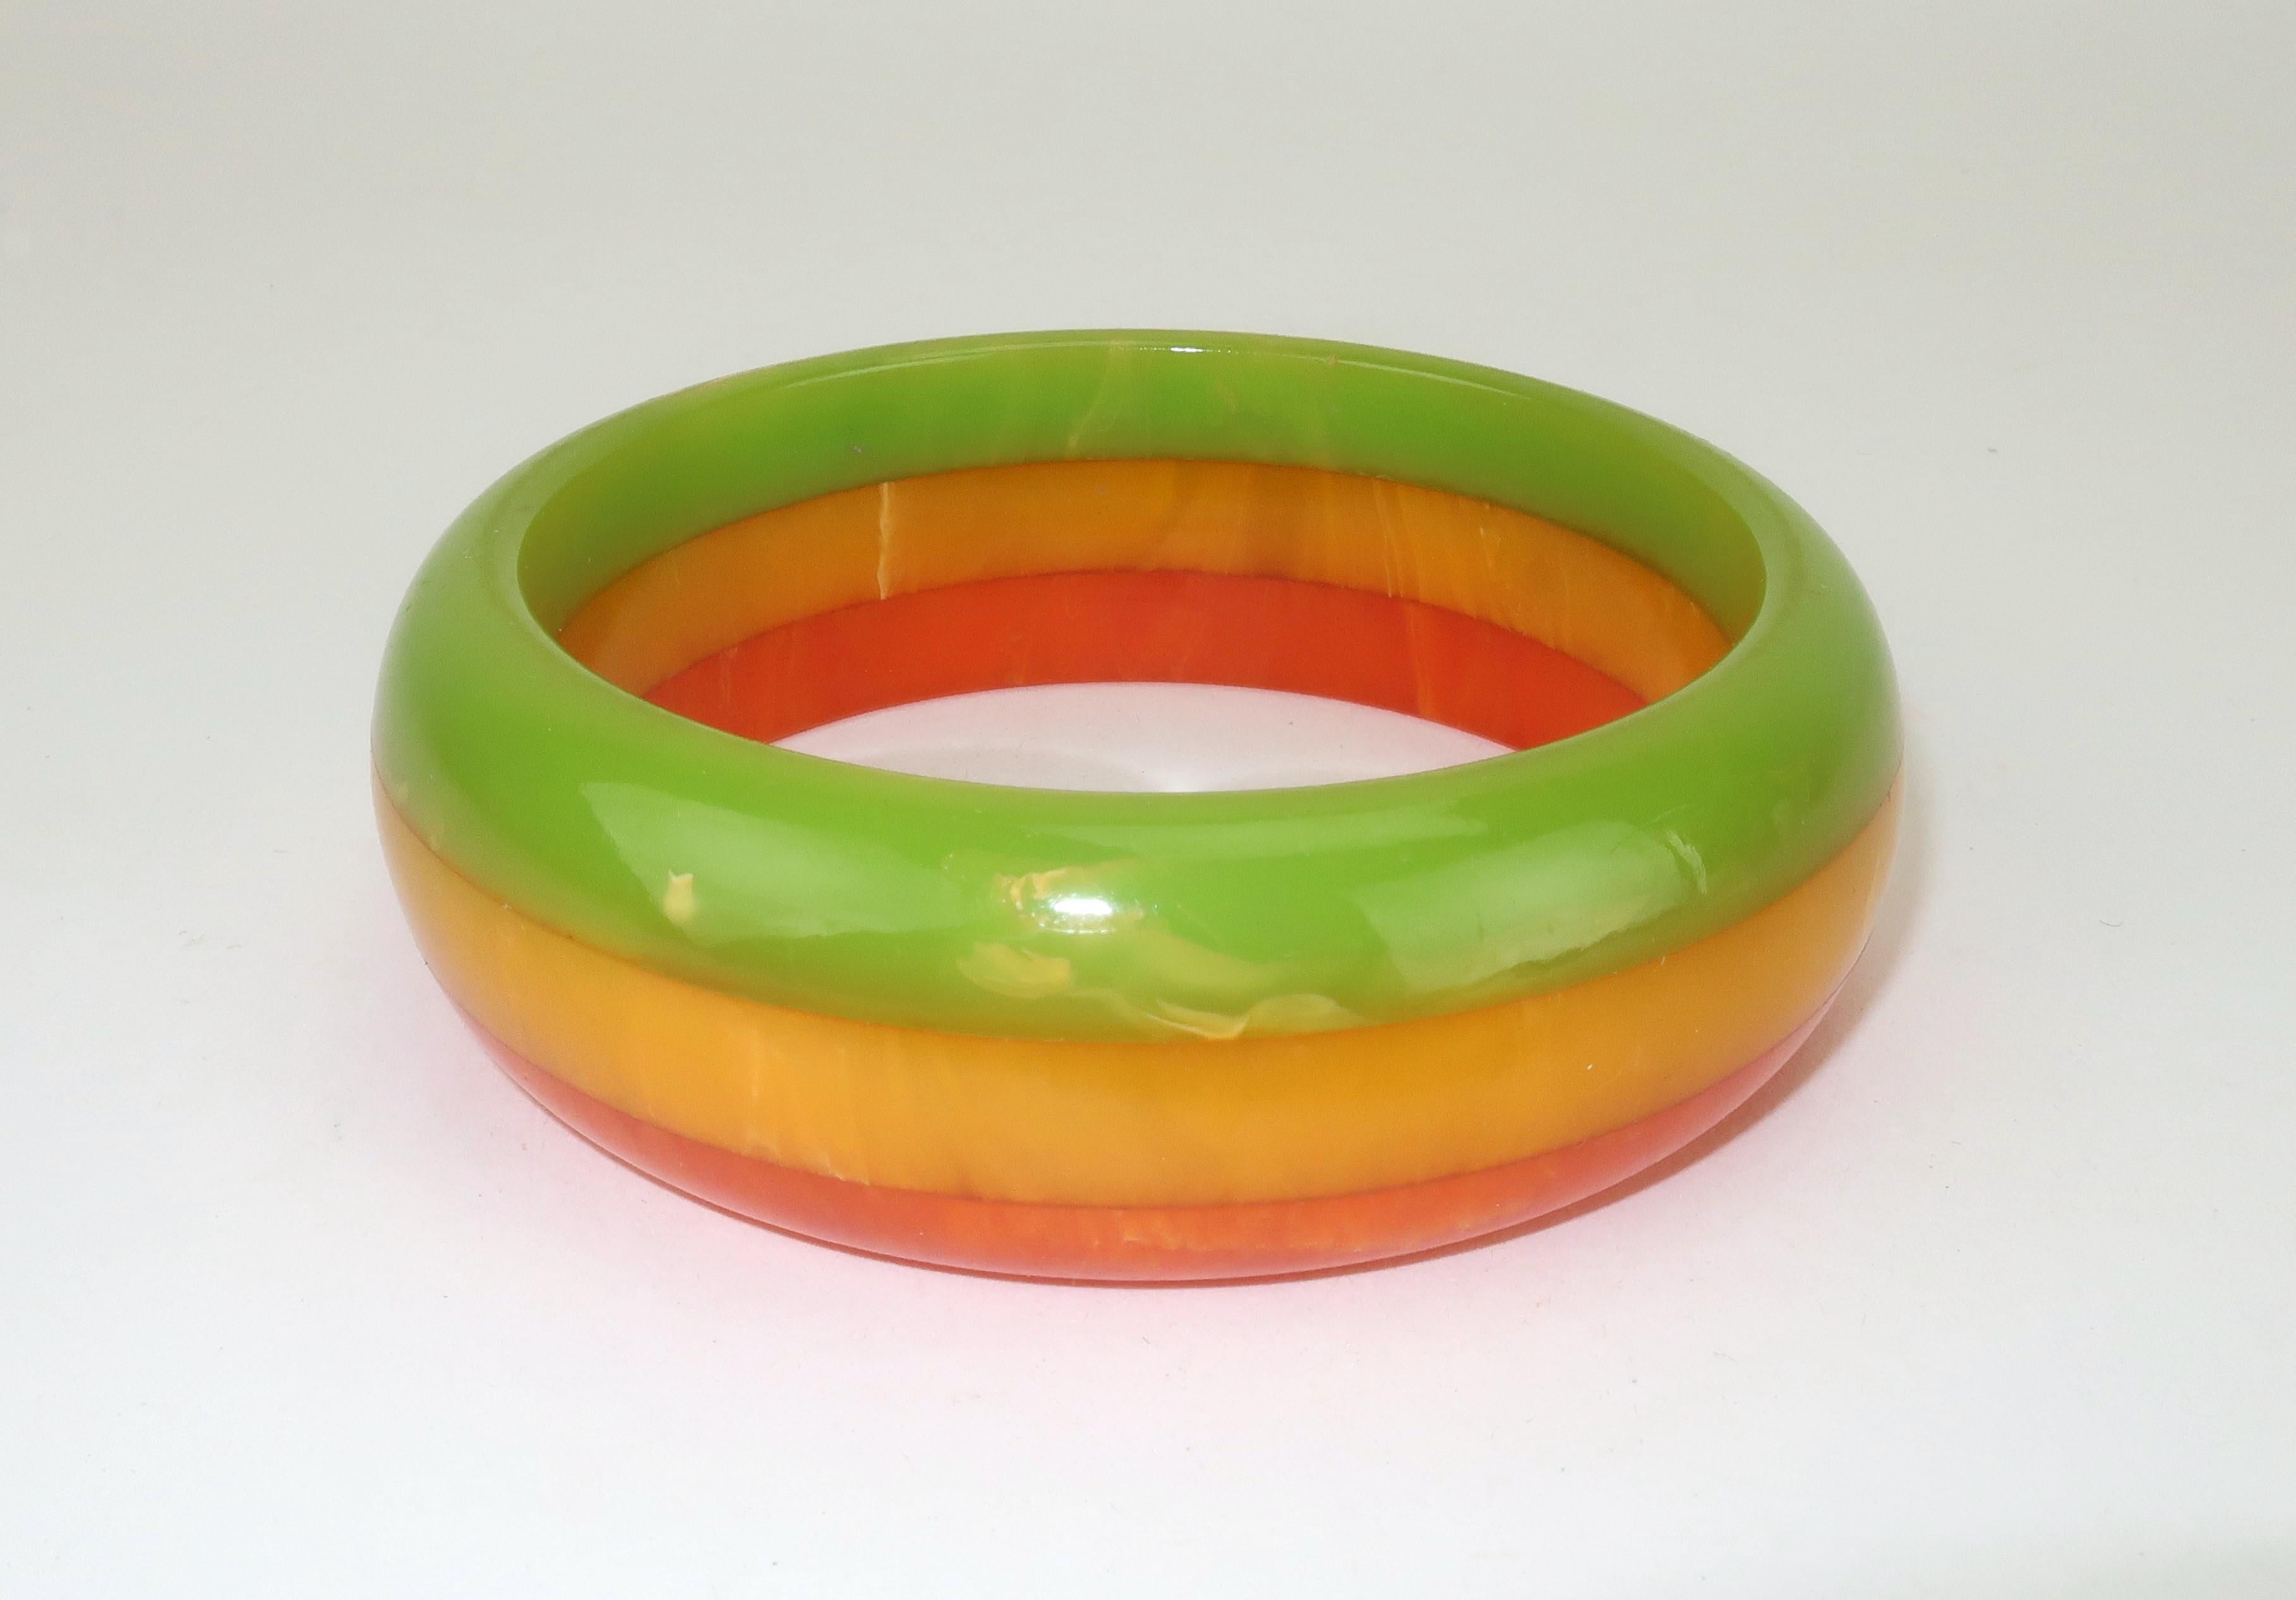 C.1950 tri-color marbleized Bakelite bangle bracelet in shades of amber orange, butterscotch and light olive green.  The three shades fused together make a great combination reminiscent of old school life savers candy.  The bangle shape is fun to